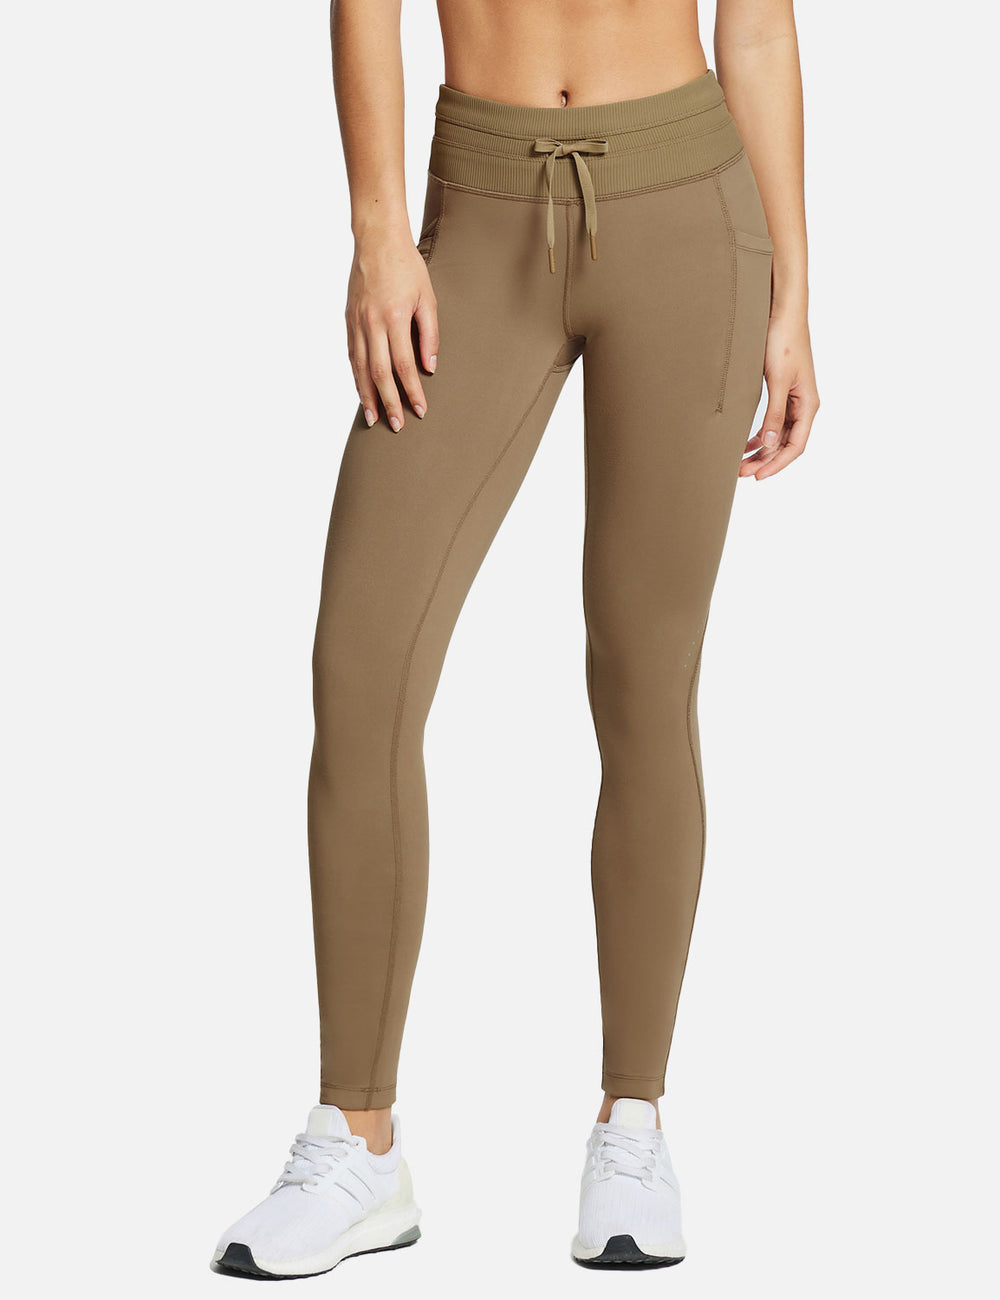 Baleaf Fleece Lined Leggings Review  International Society of Precision  Agriculture